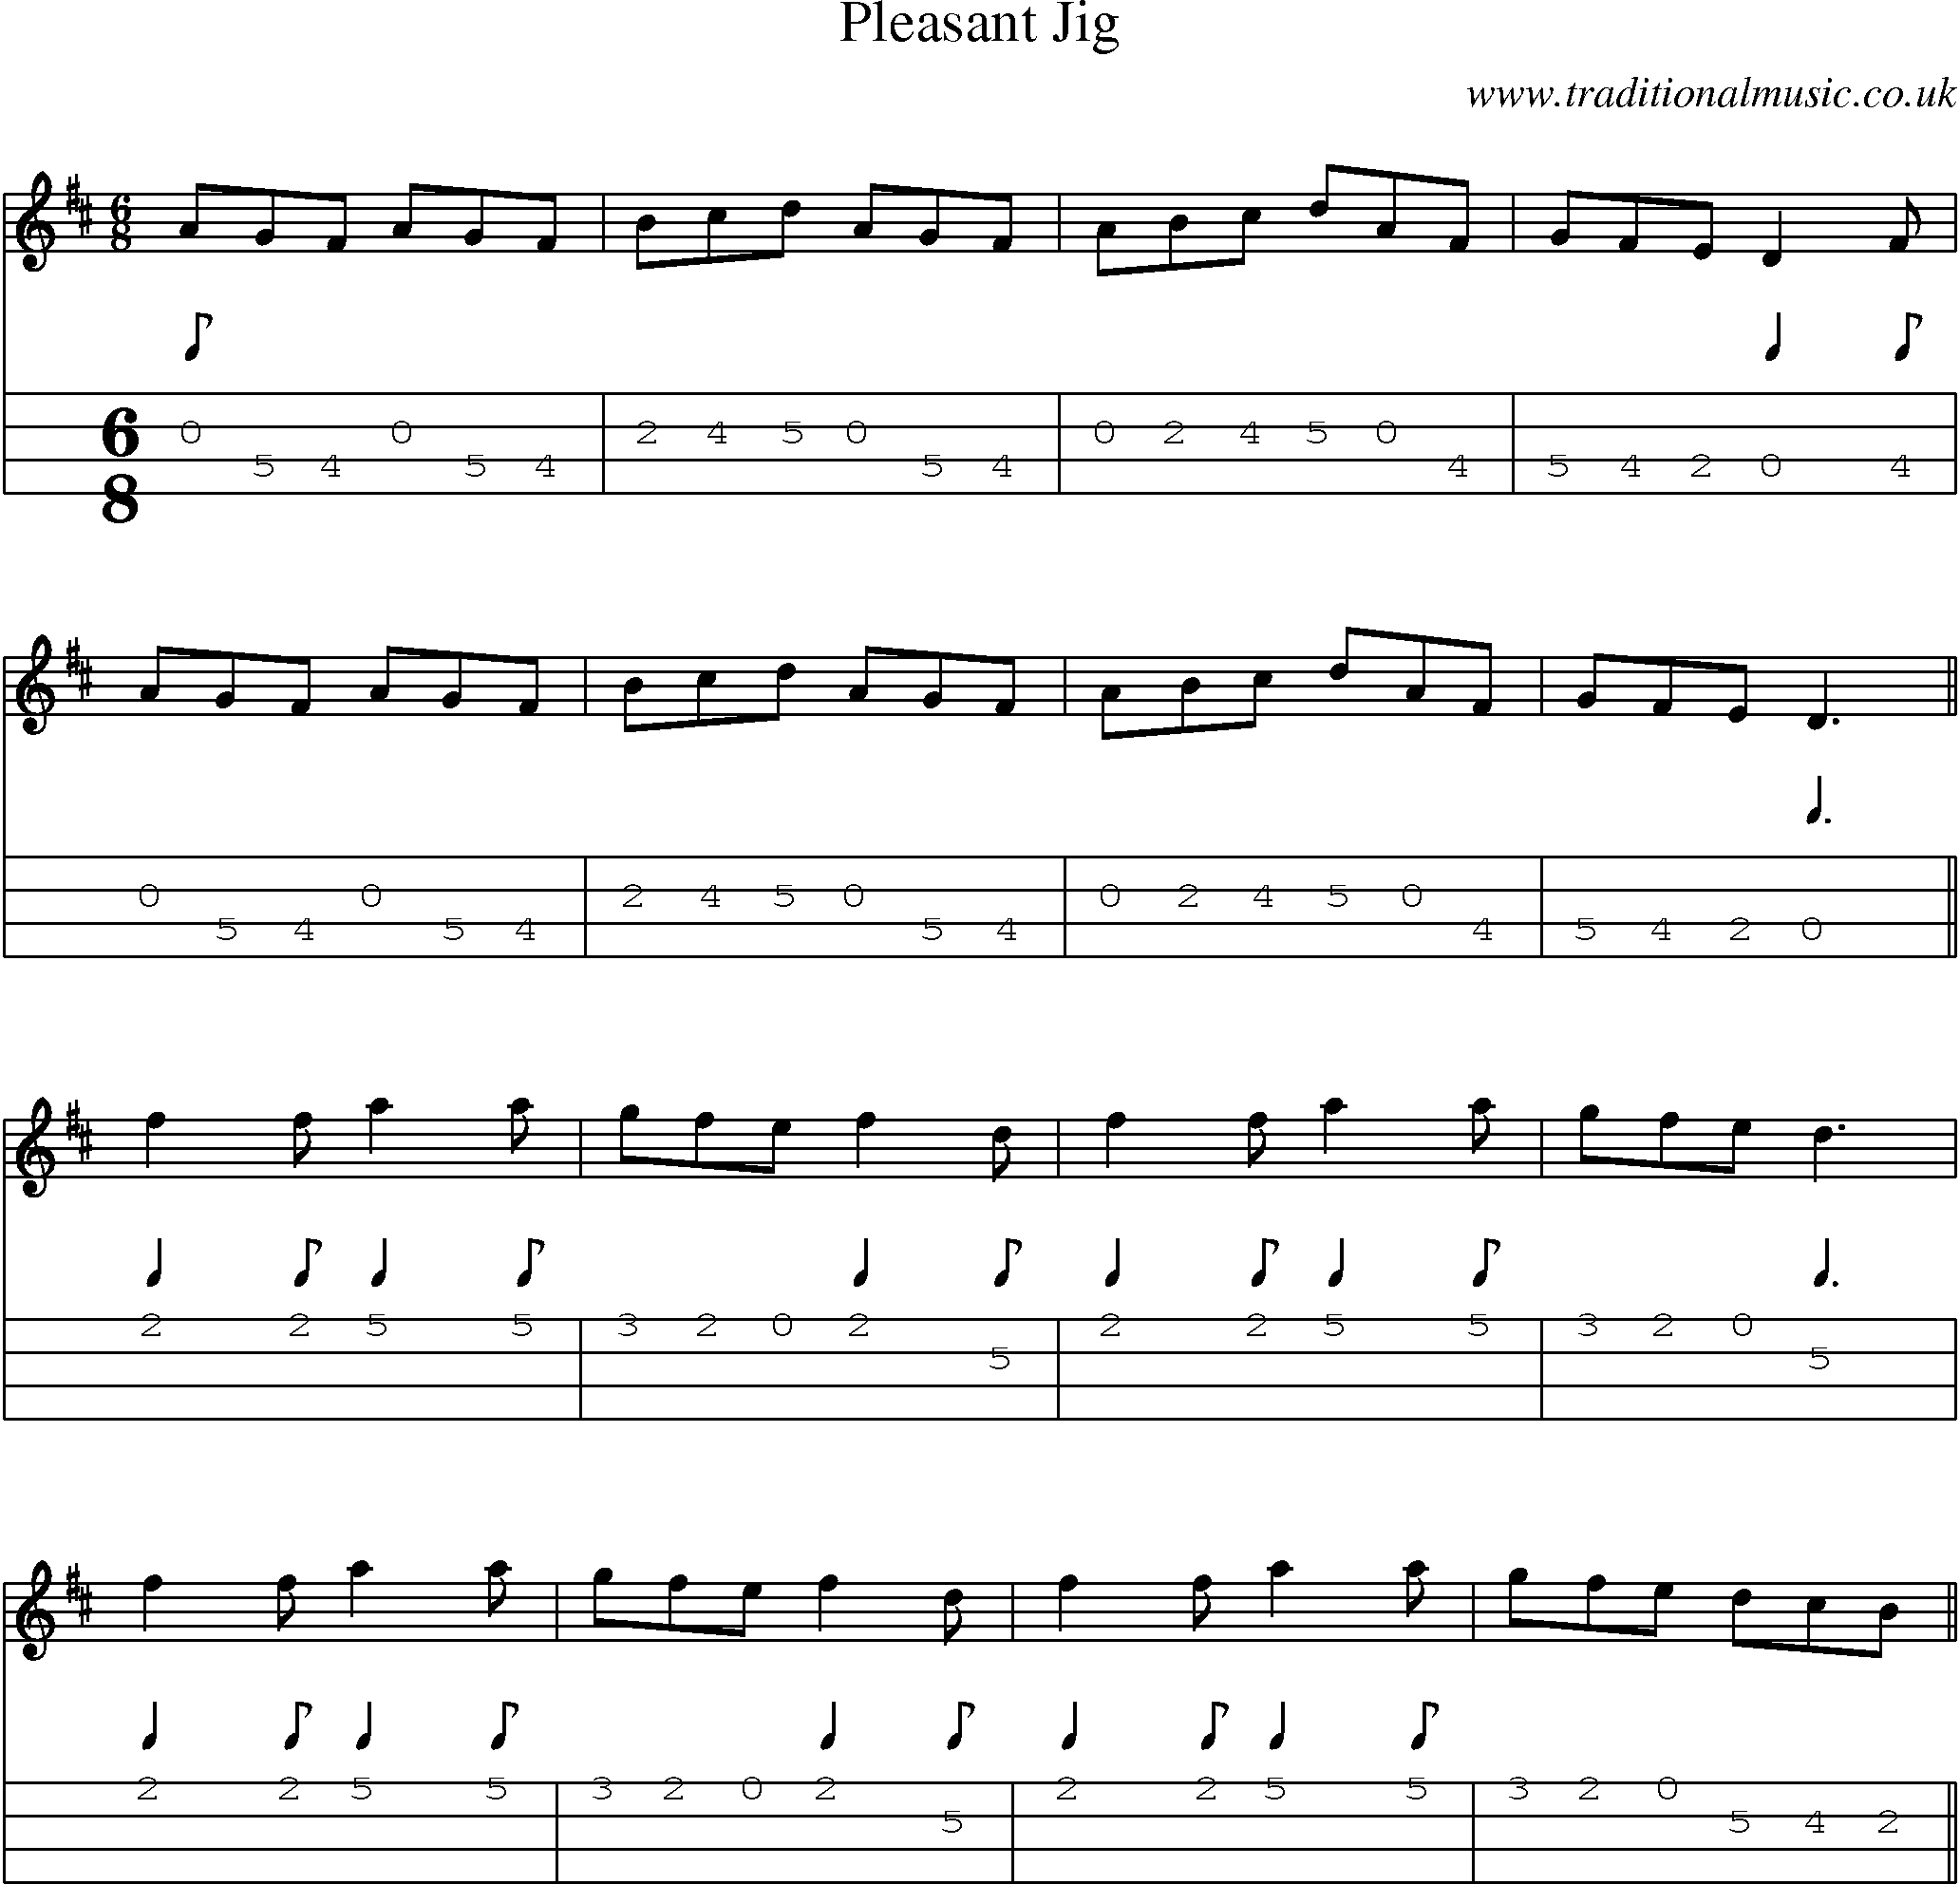 Music Score and Mandolin Tabs for Pleasant Jig